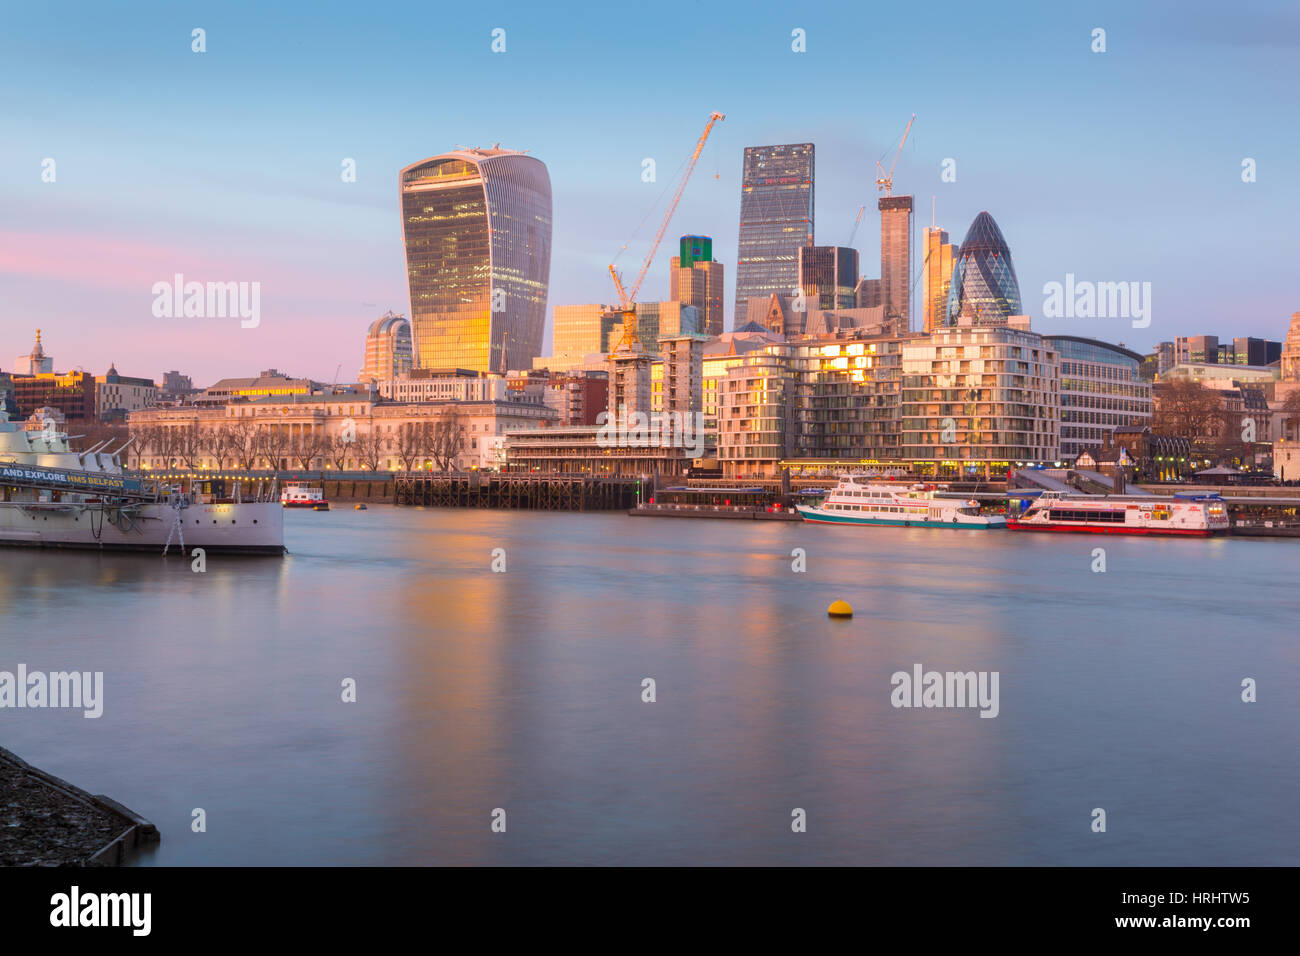 The City of London skyline and River Thames from South Bank, London, England, United Kingdom Stock Photo